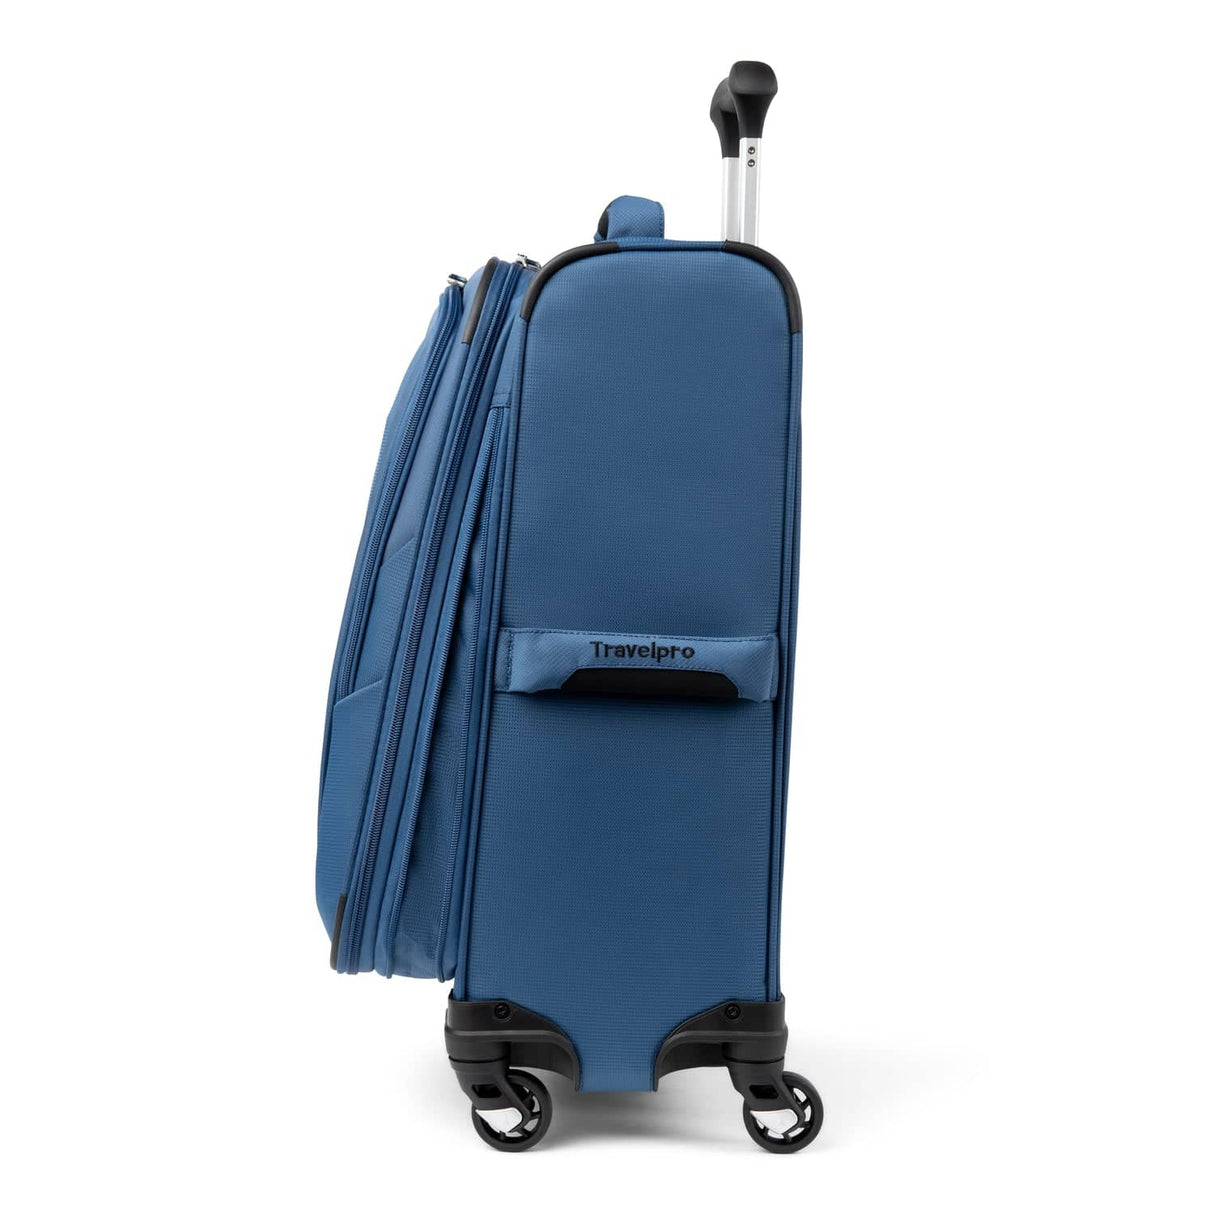 Travelpro Maxlite 5 21" Carry-On Expandable Spinner , , 401176147_side2-1500x1500-f3a2c67_1024x1024_2x_d07d157a-cd82-46b6-9d06-a755966ed37d